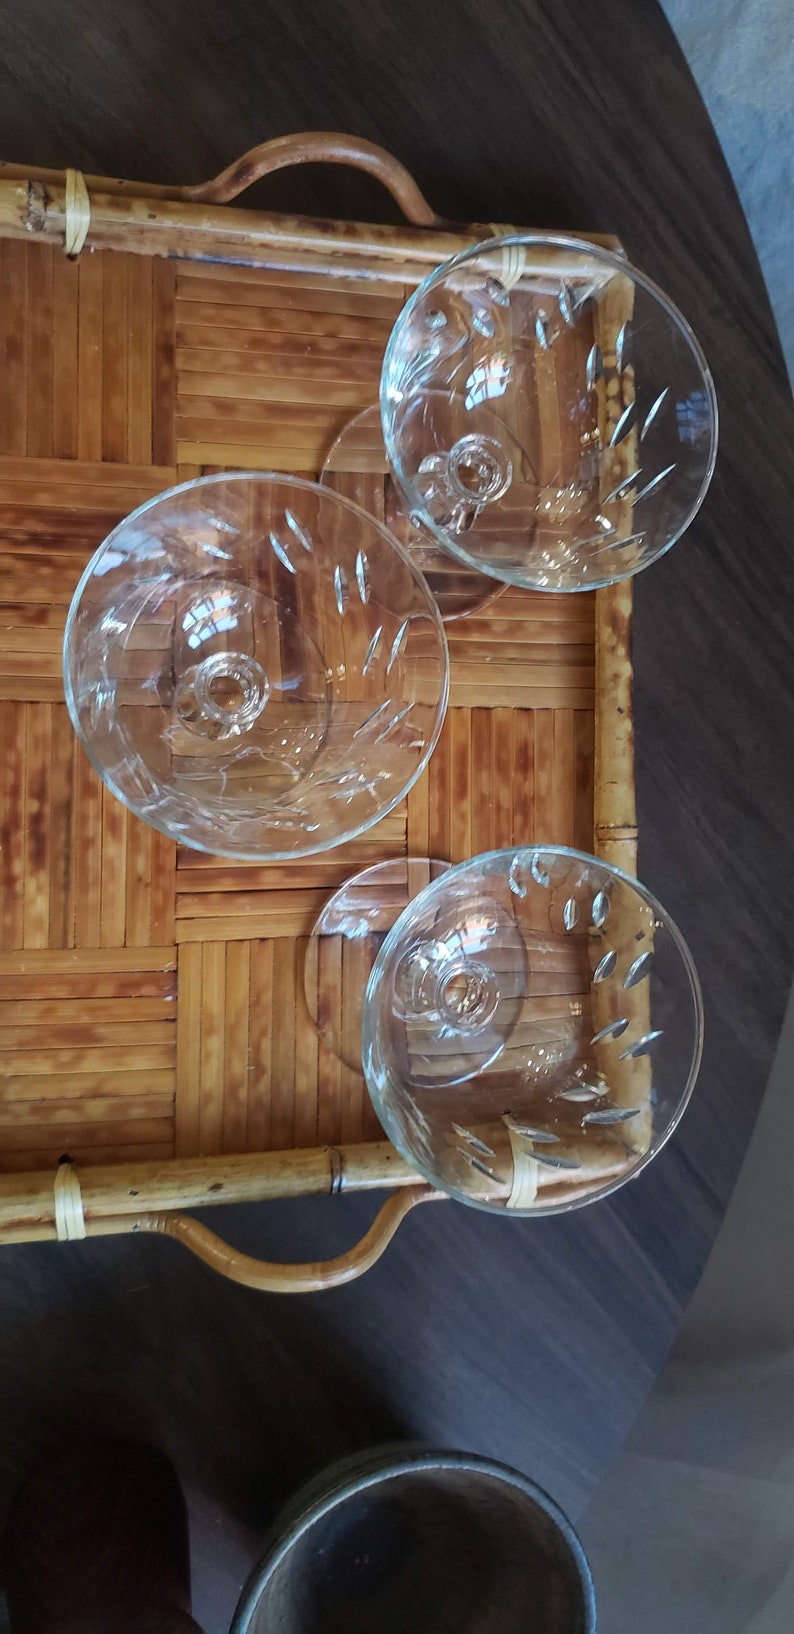 Vintage Libbey Colonial Heritage Cocktail Coupe, Vintage Coupe Glasses, Champagne Coupe, Etched Trio Glassware, Set of 3 image 3